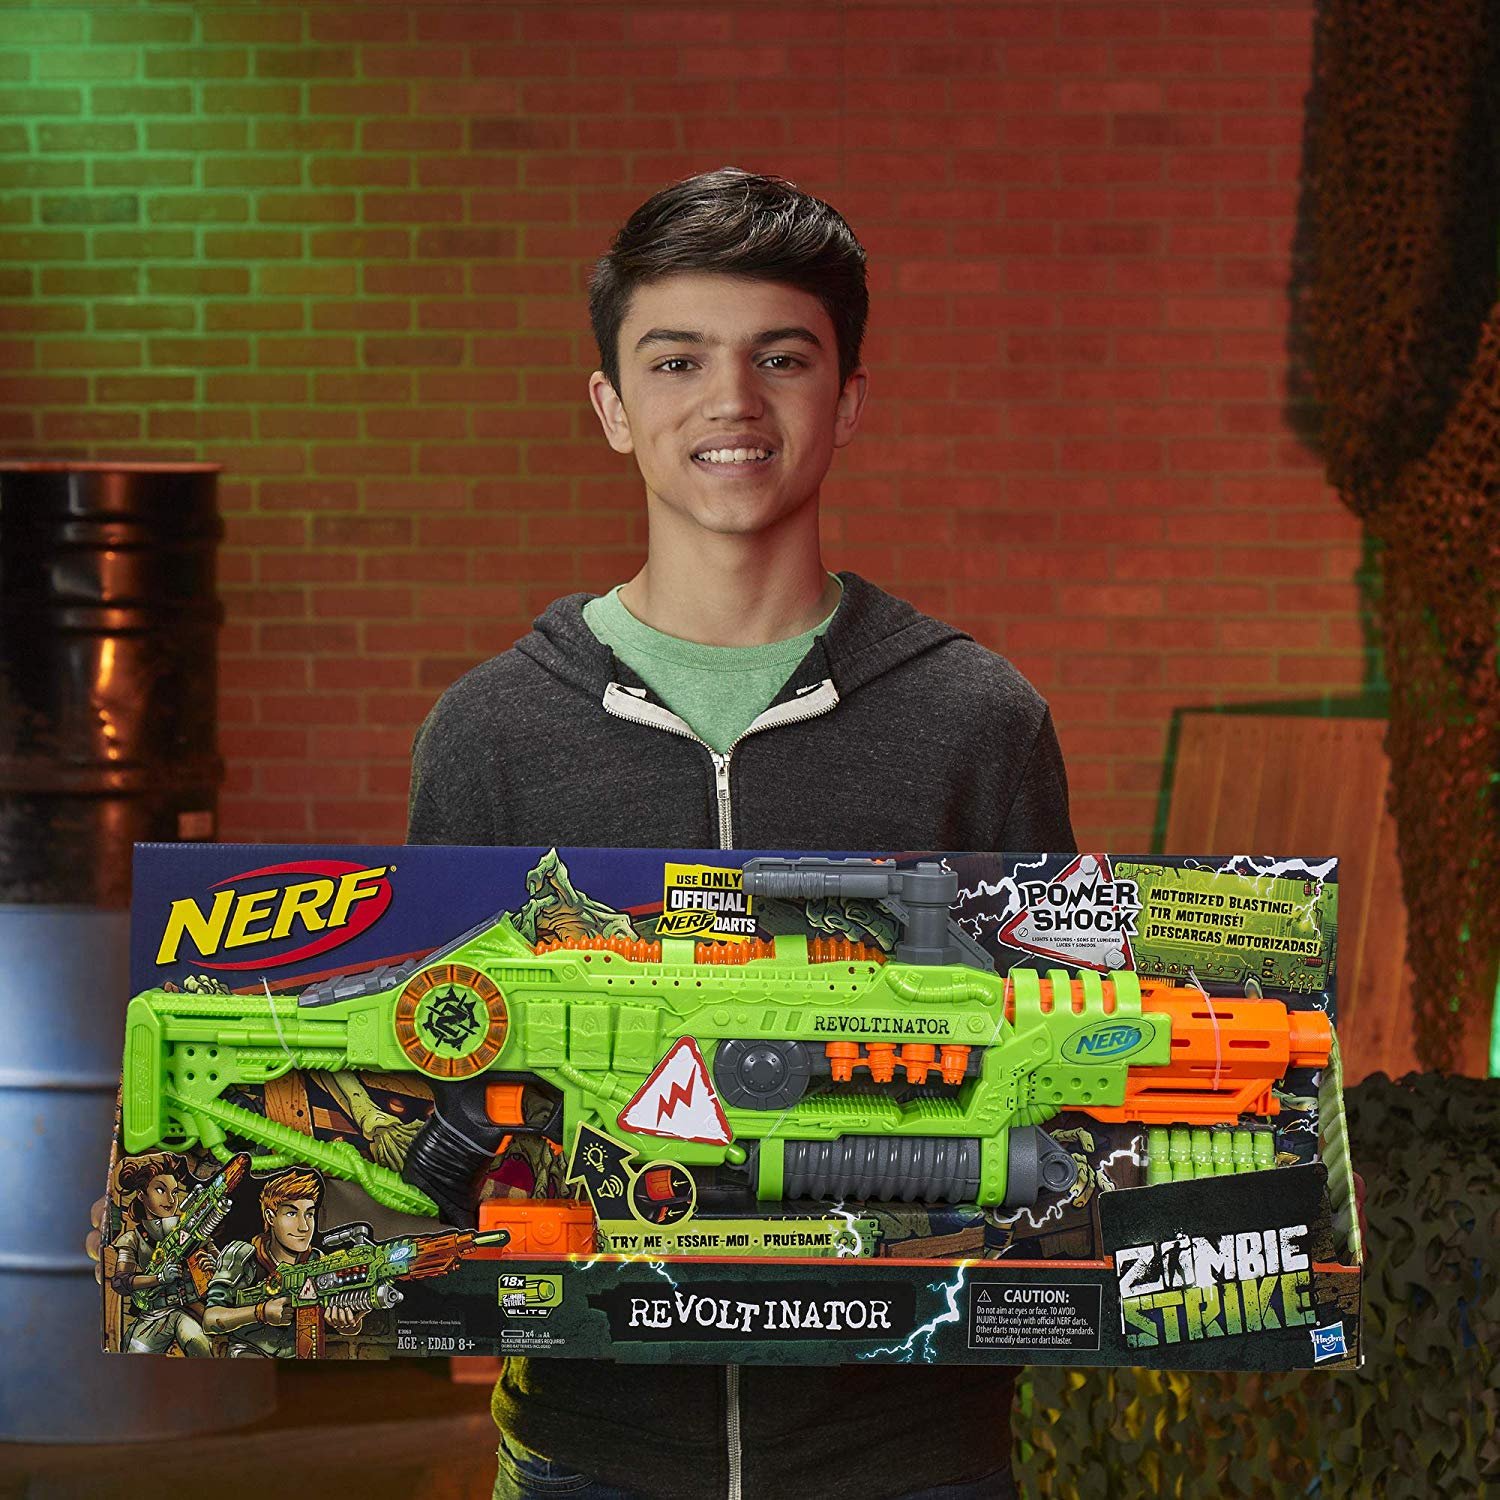 Revoltinator Nerf Zombie Strike Blaster with motorized Lights Sounds & 18 Official Darts for Kids, Teens, & Adults - Walmart.com